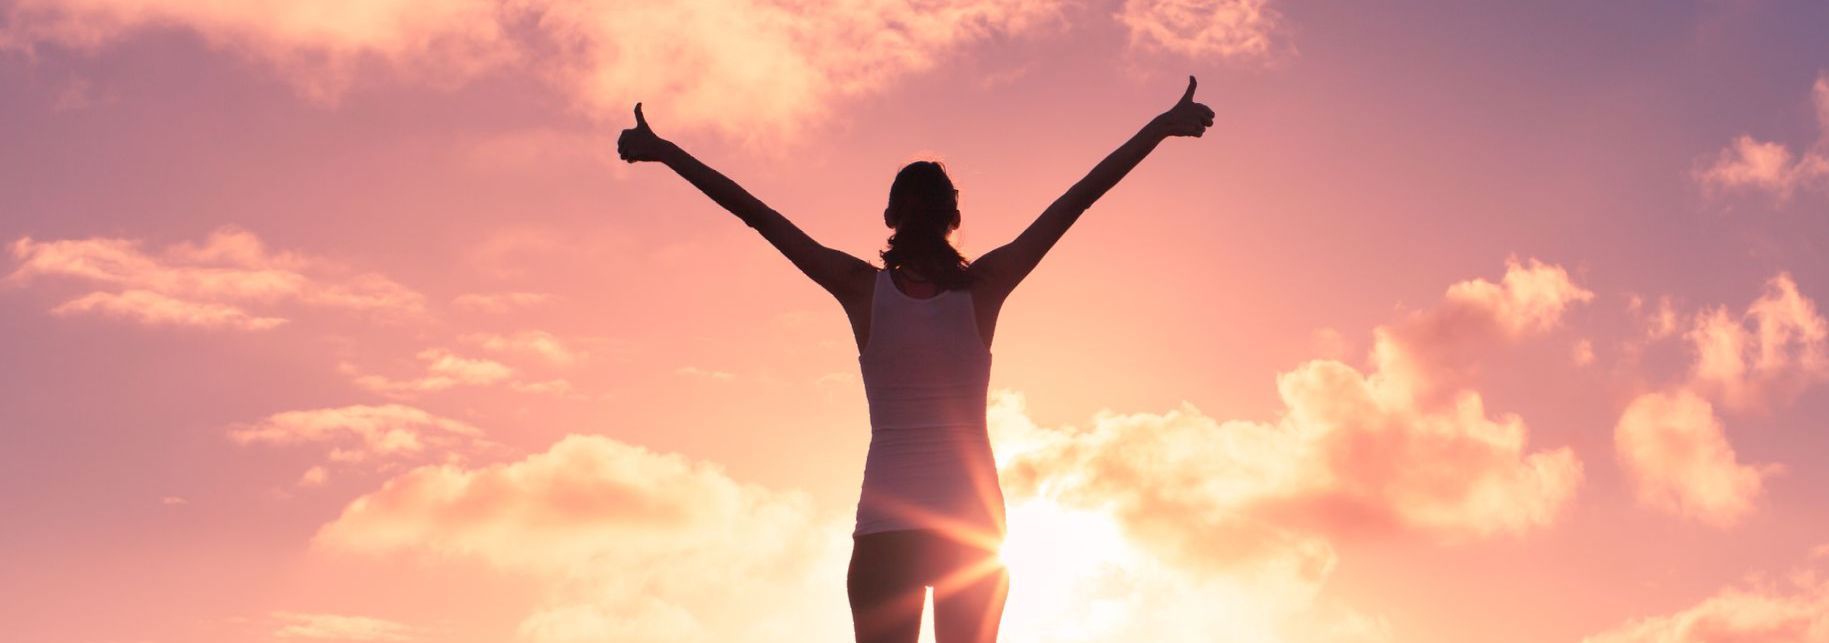 a woman with her arms outstretched giving a thumbs up